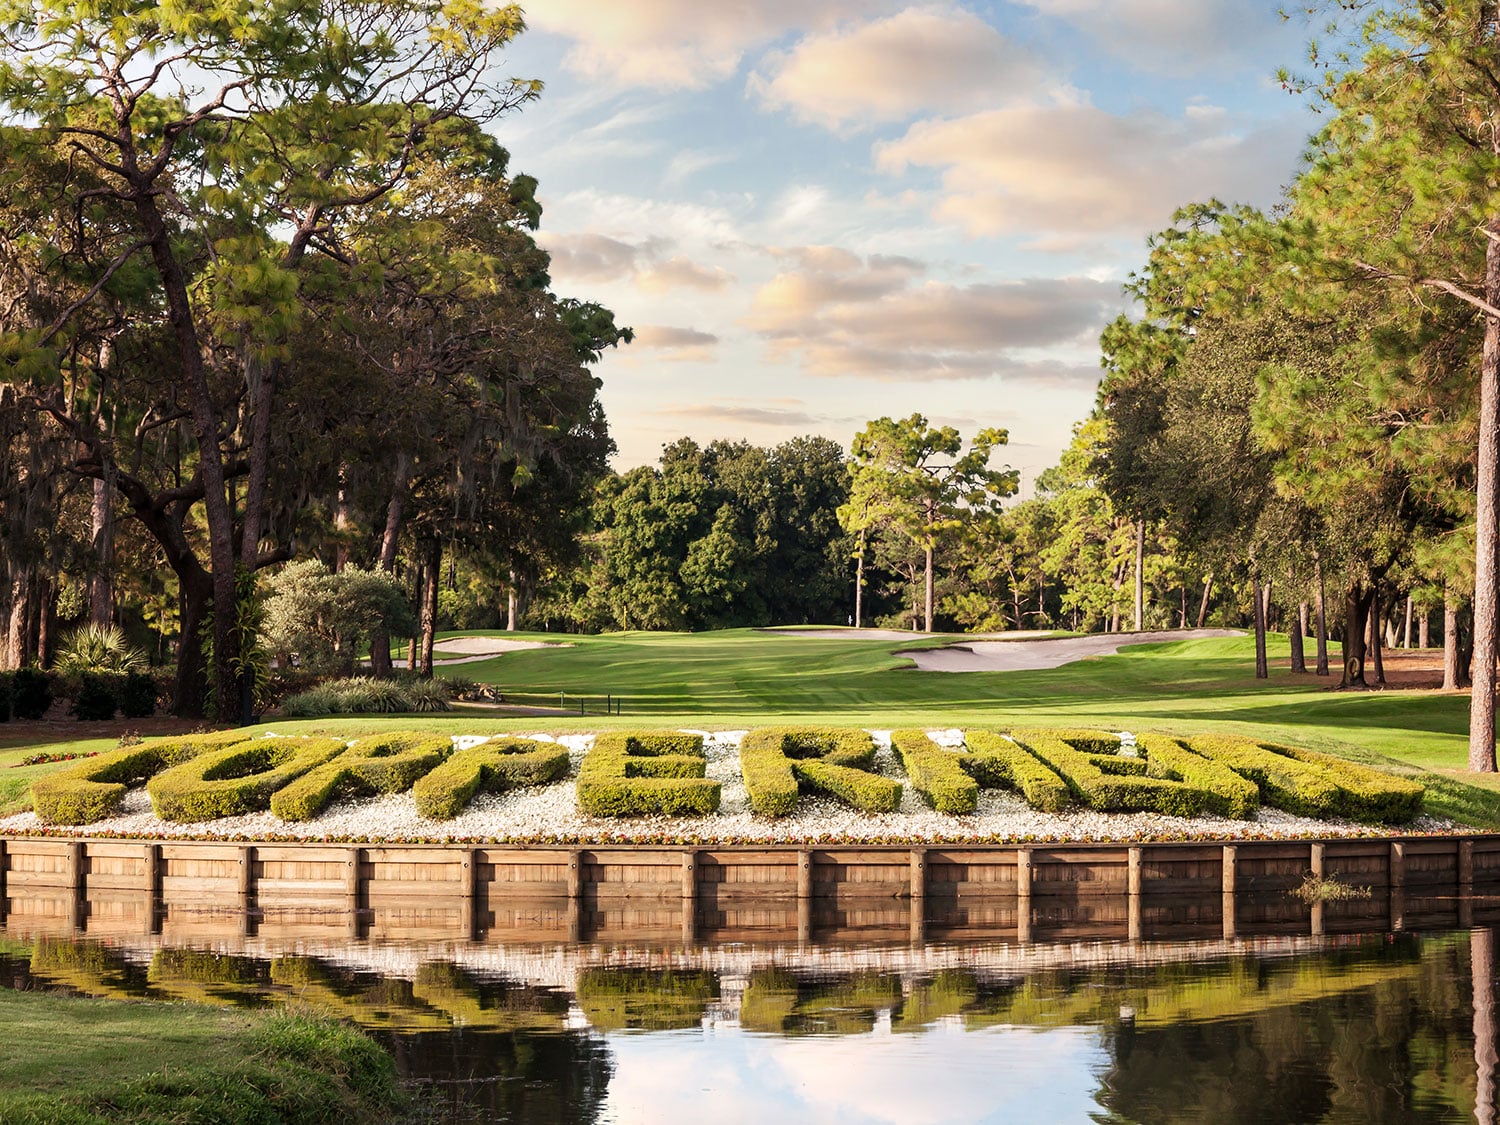 The 17th hole of the Copperhead Course at Innisbrook Golf Resort in Palm Harbor, Florida, features the name in the decorative bushes.